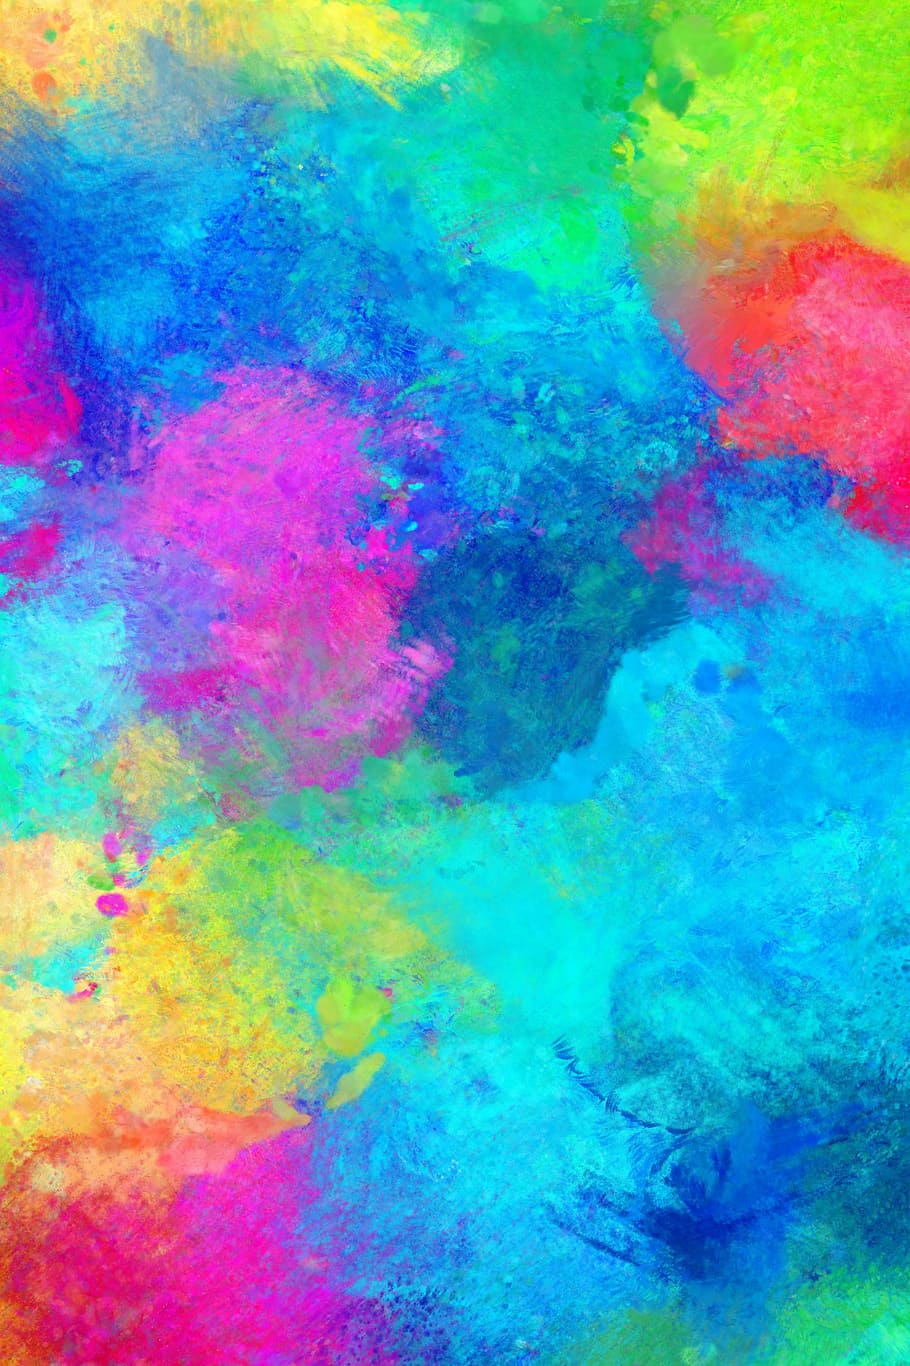 blue, pink, and yellow abstract painting, mood, creativity, atmosphere